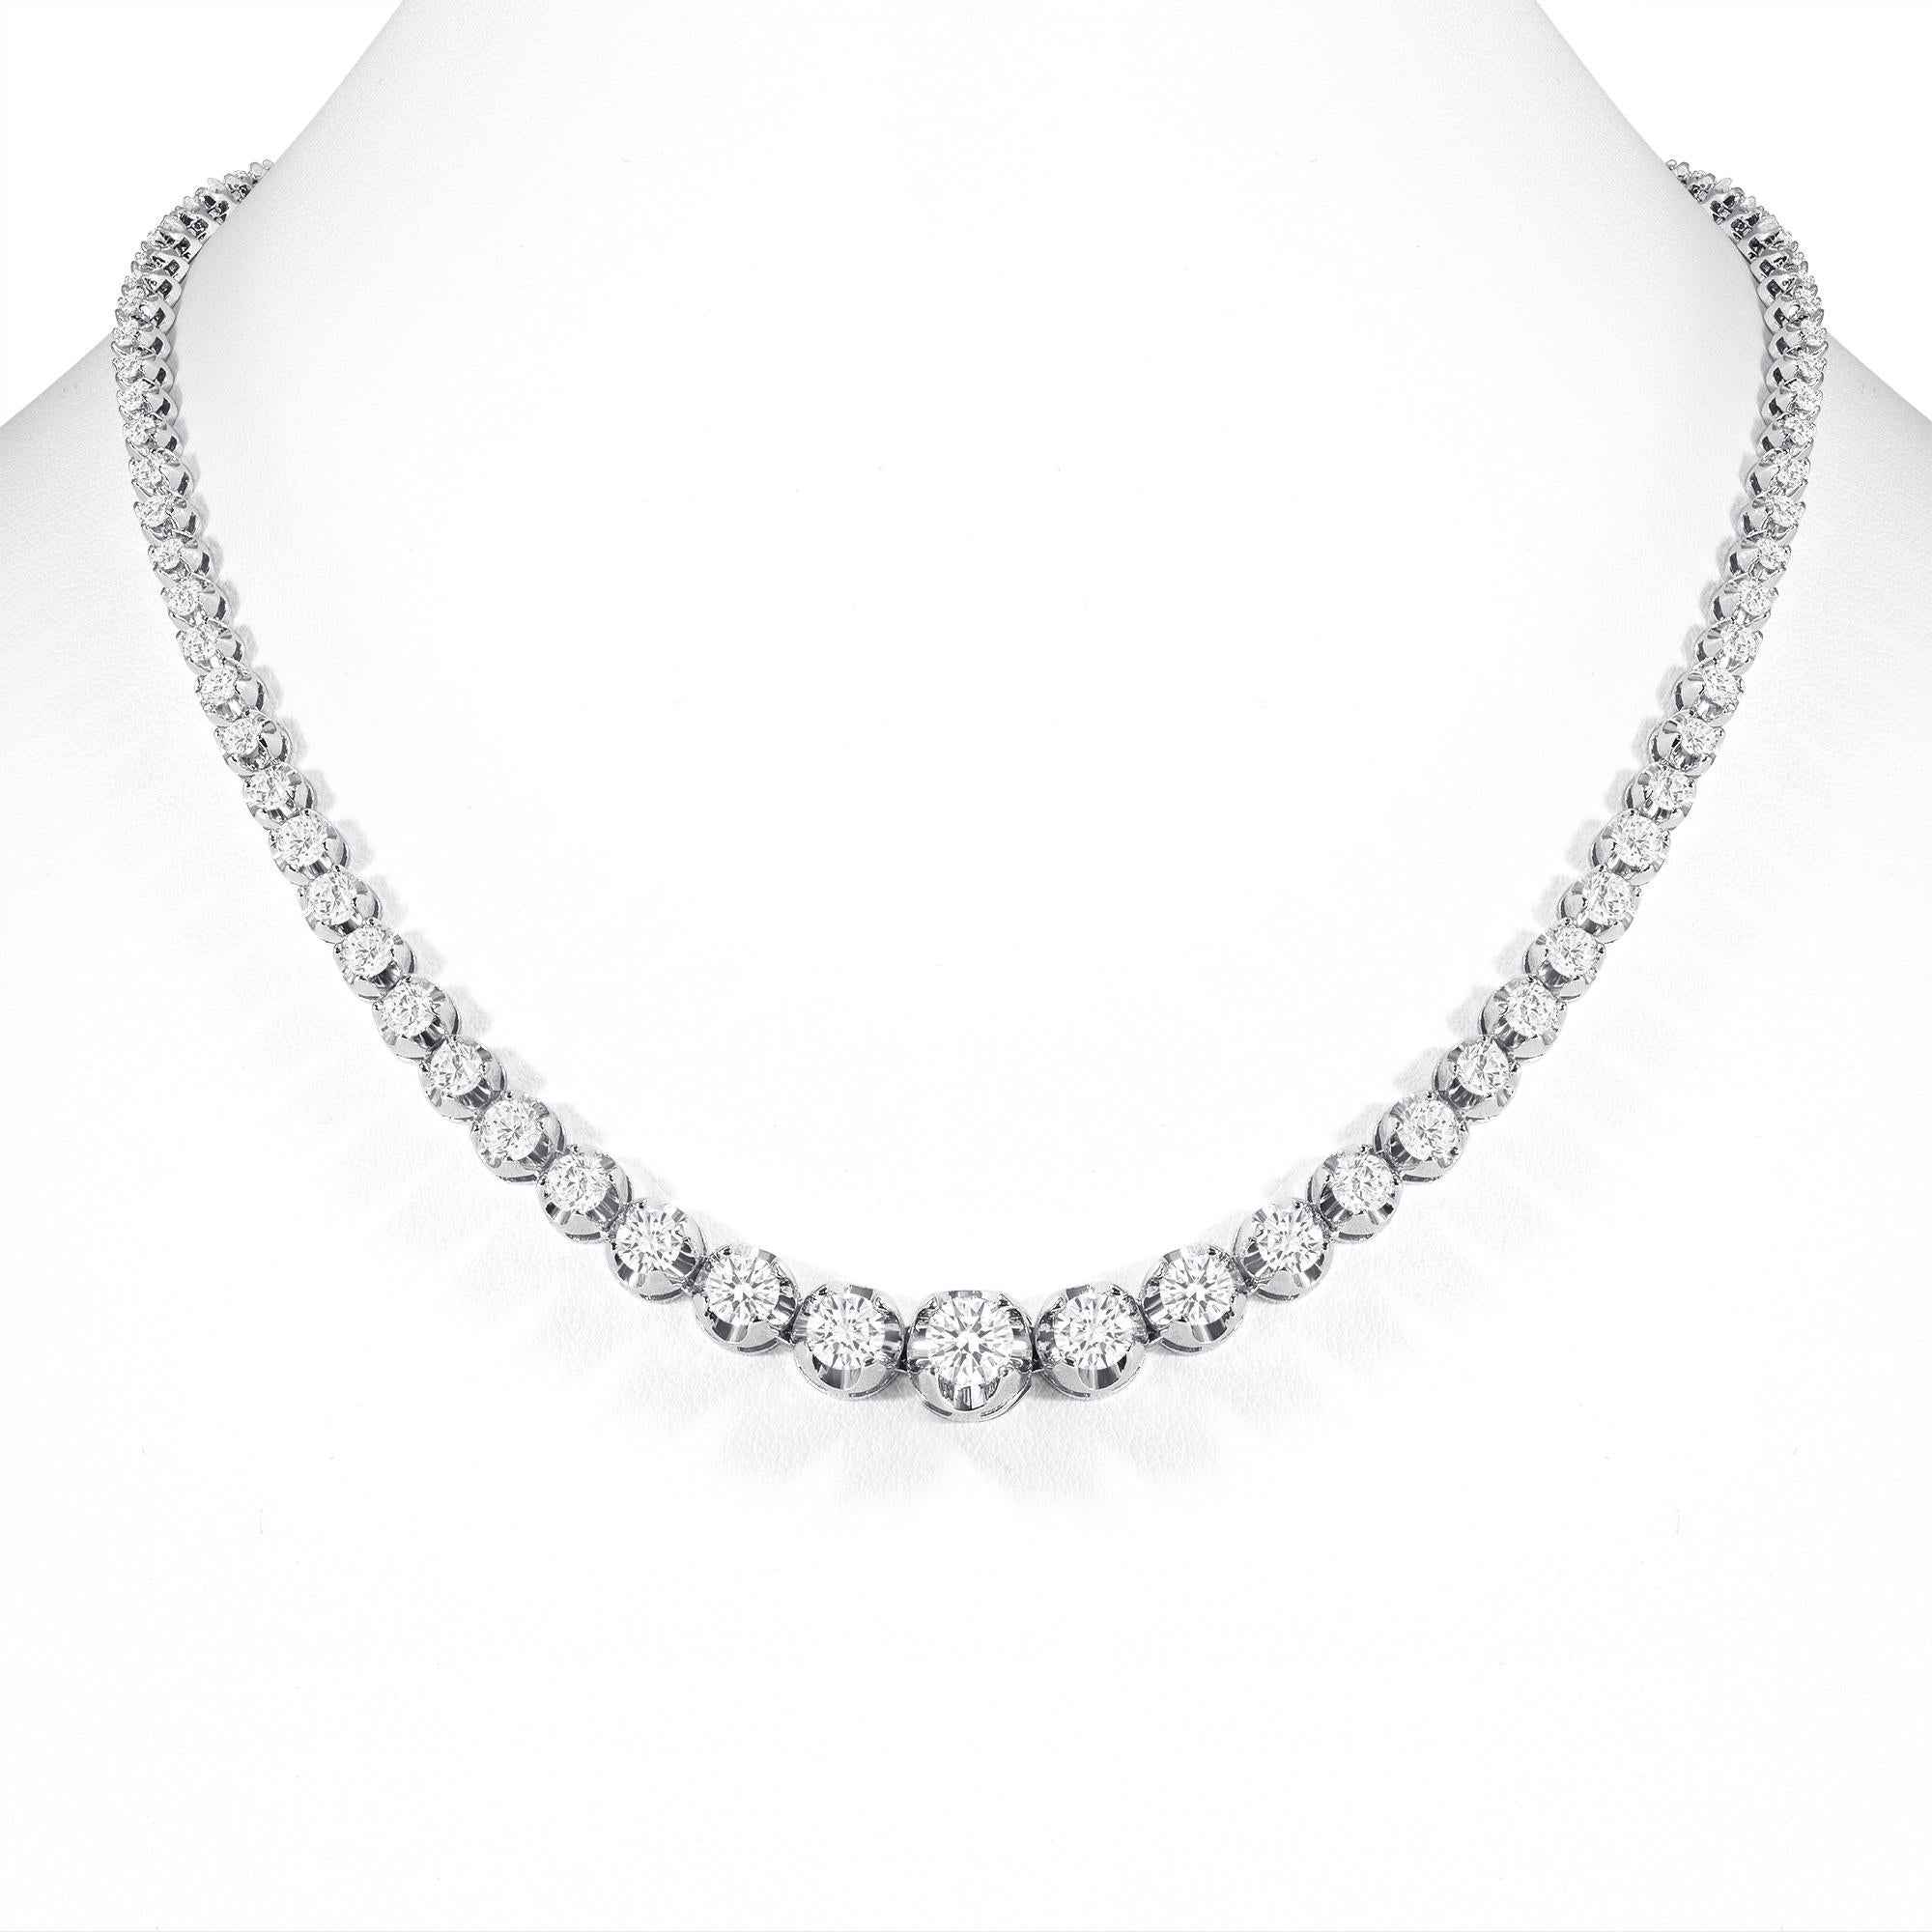 This finely made graduated necklace with beautiful round diamonds sits elegantly on any neck. 

Metal: 14k Gold
Diamond Cut: Round
Total Diamond Approx. Carats:  5ct
Diamond Clarity: VS
Diamond Color: F-G
Size: 18 inches
Color: White Gold
Included